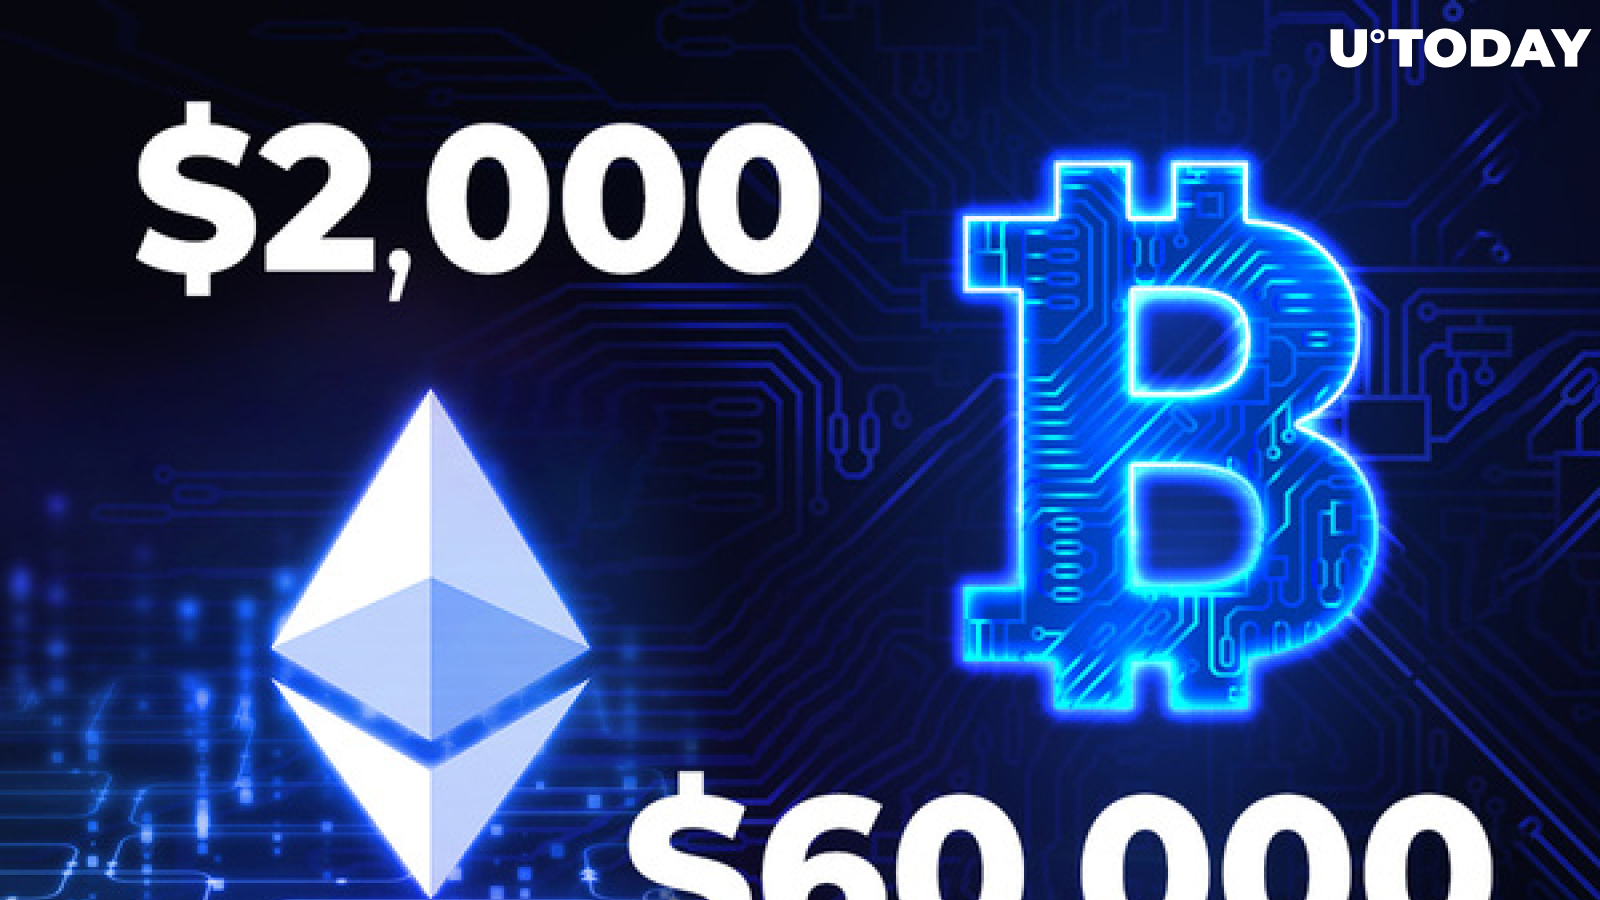 Bitcoin Hits $60,000, Ethereum Reaches $2,000 on the Same Day